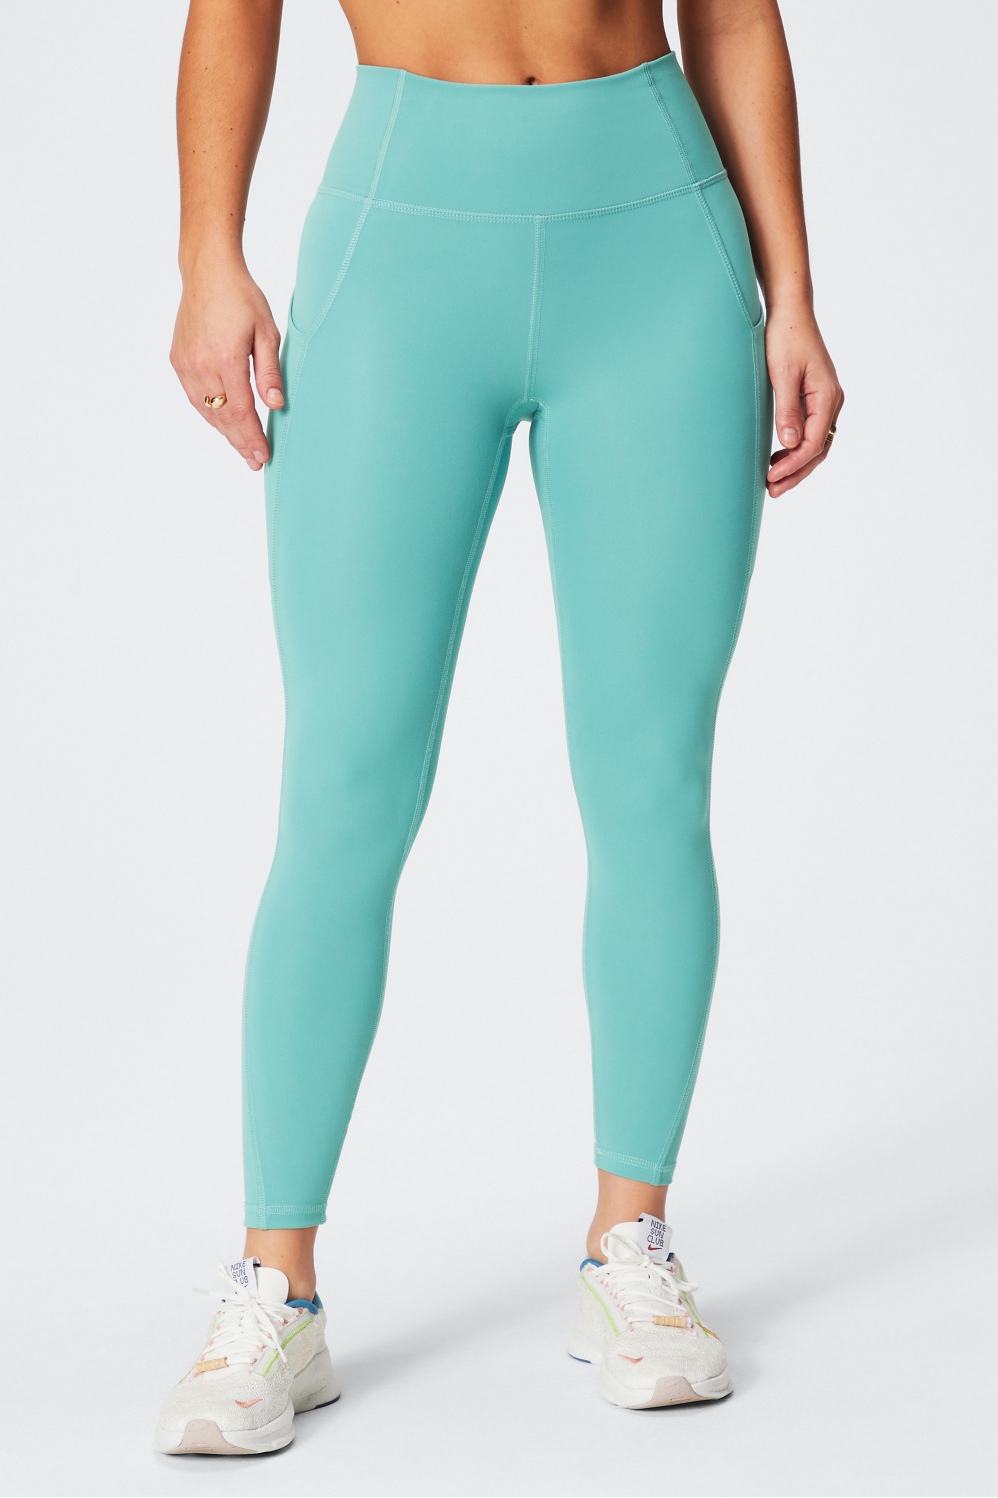 Fabletics pure luxe oasis - Gem